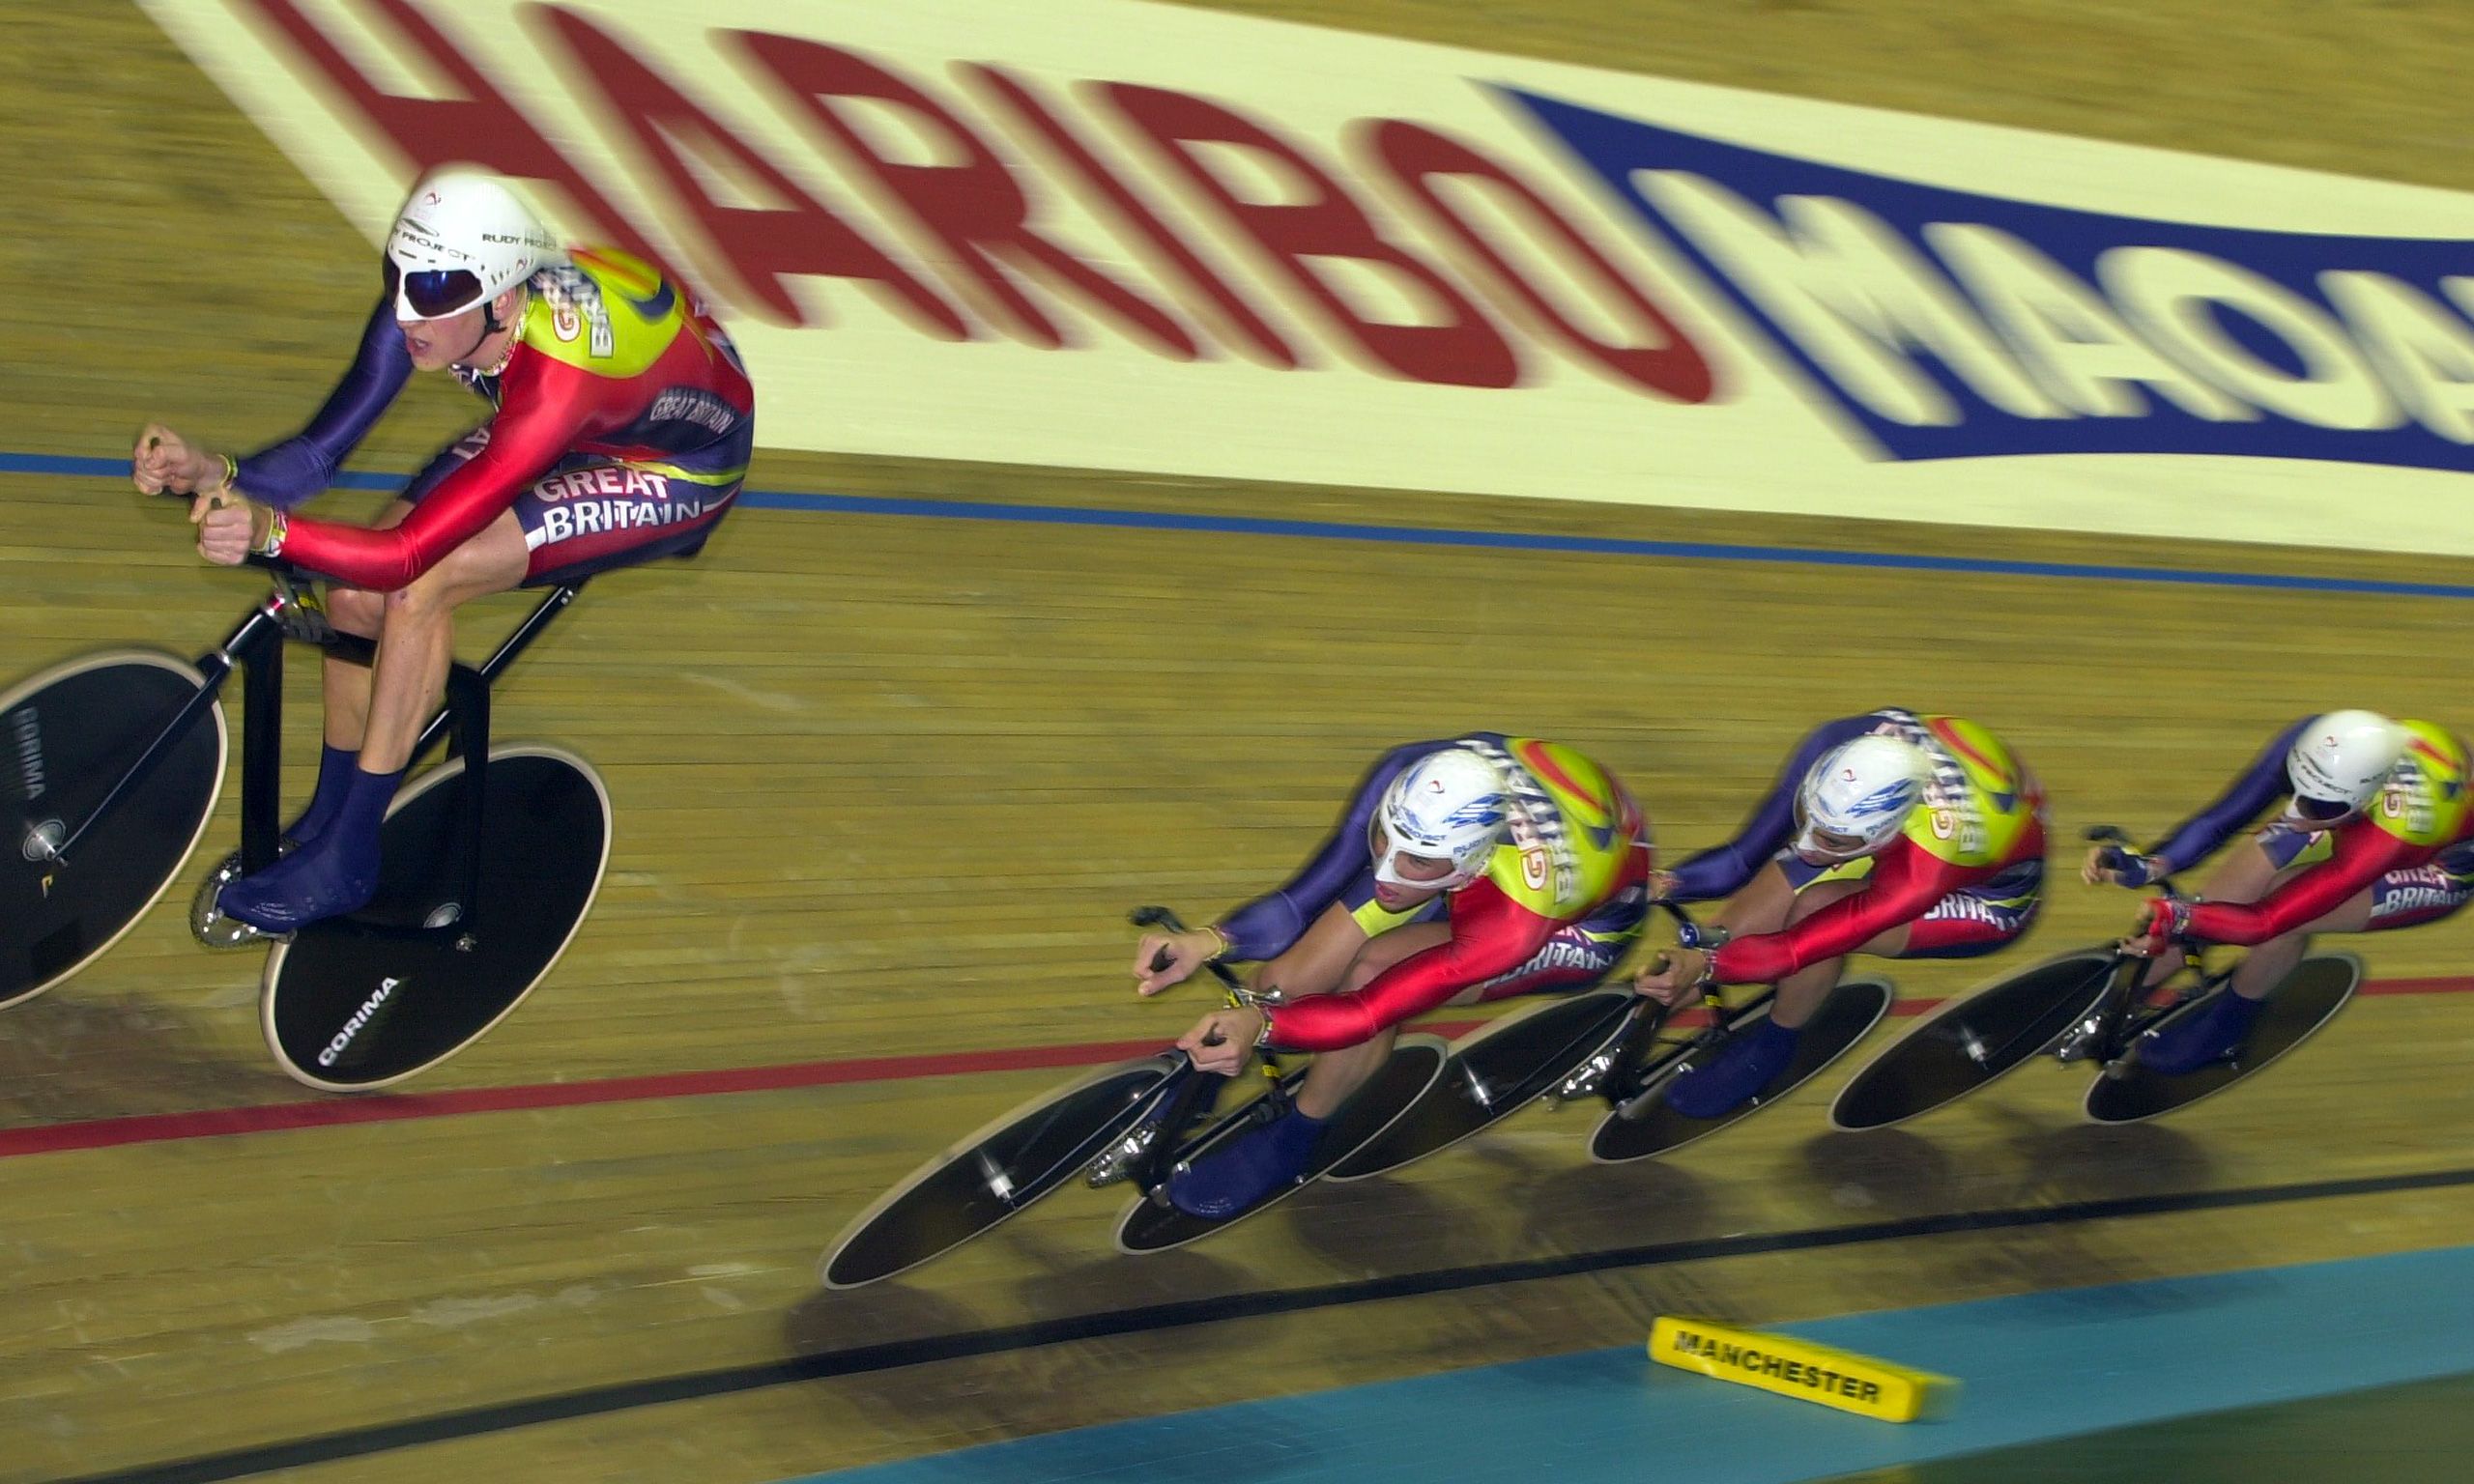 UCI World Track Cycling Championships in Manchester